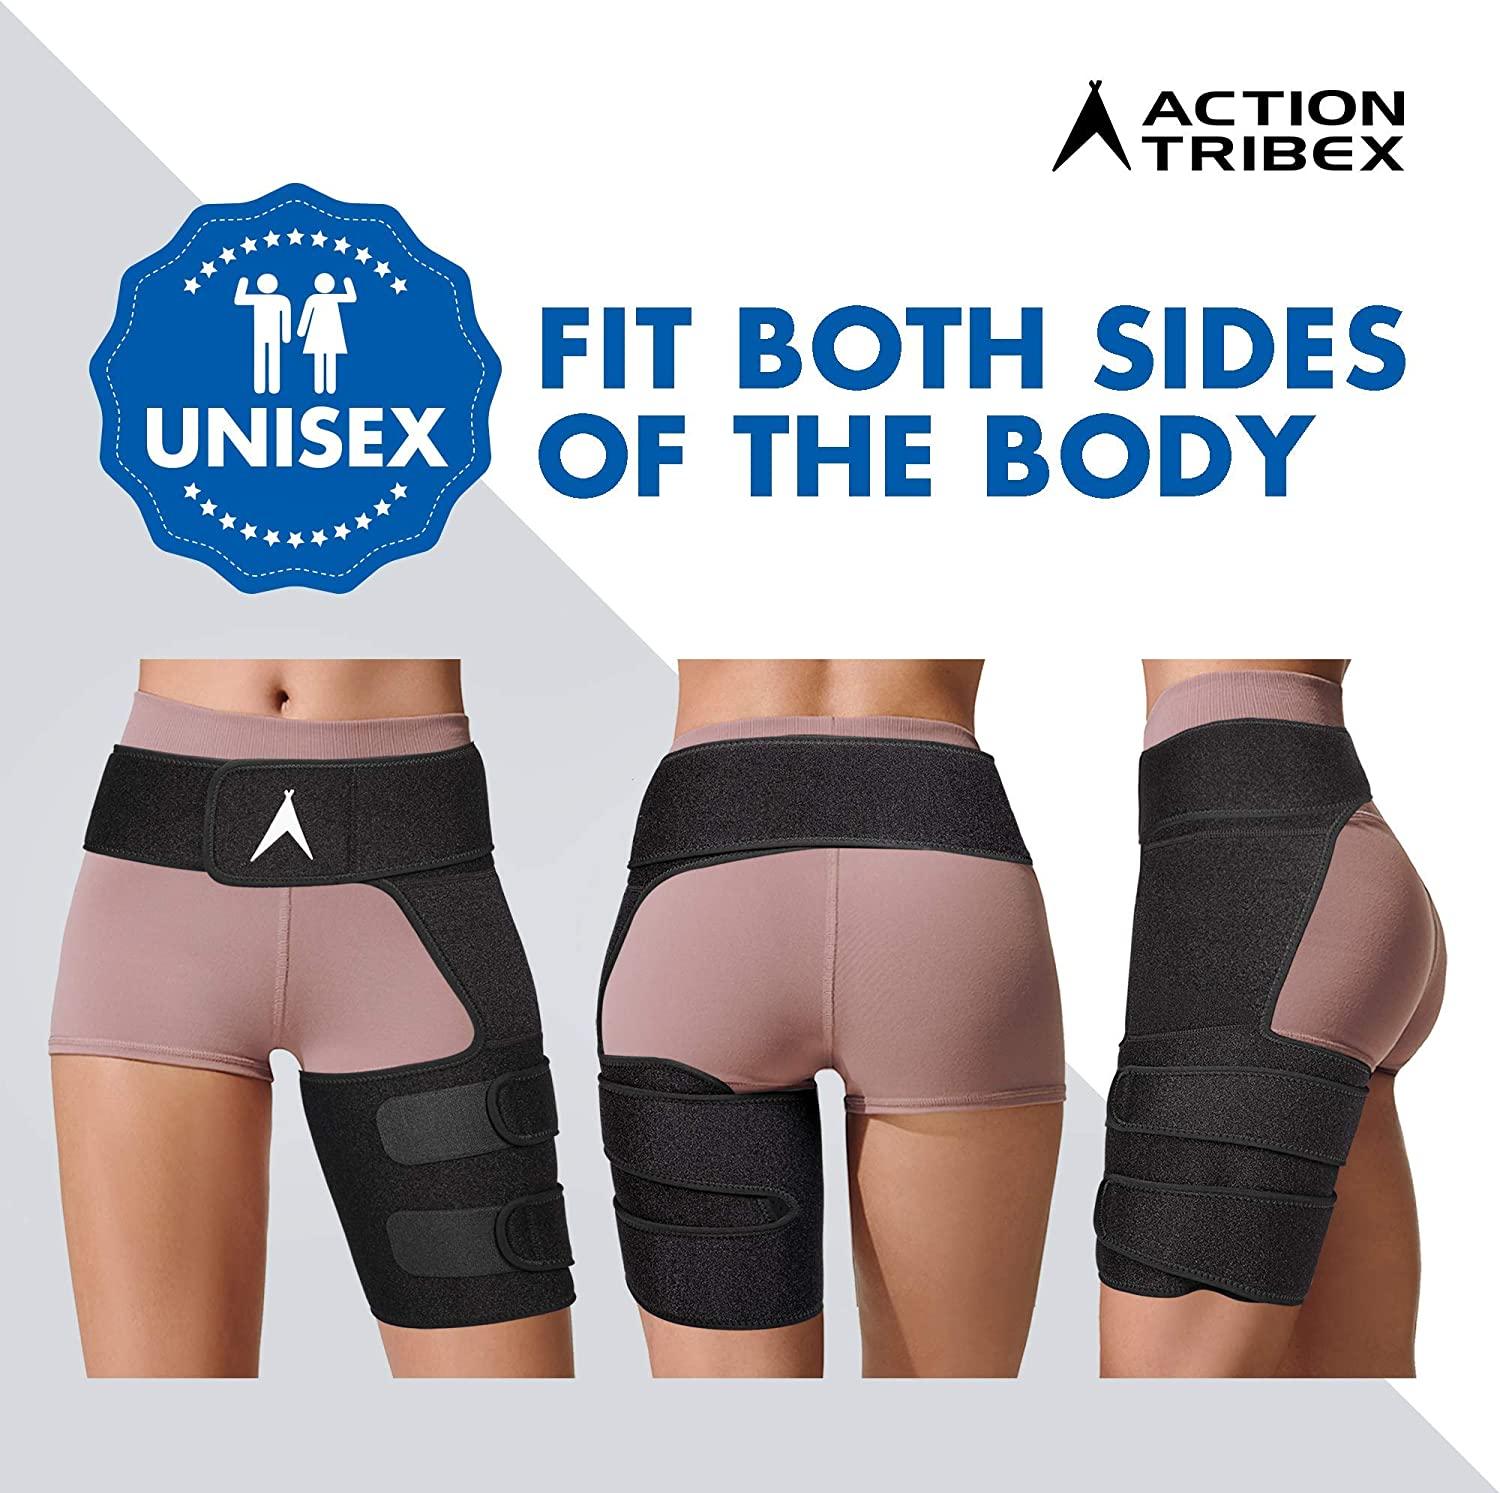 MarkWrap Hip Brace and Hip Support Belt for Support and Thigh